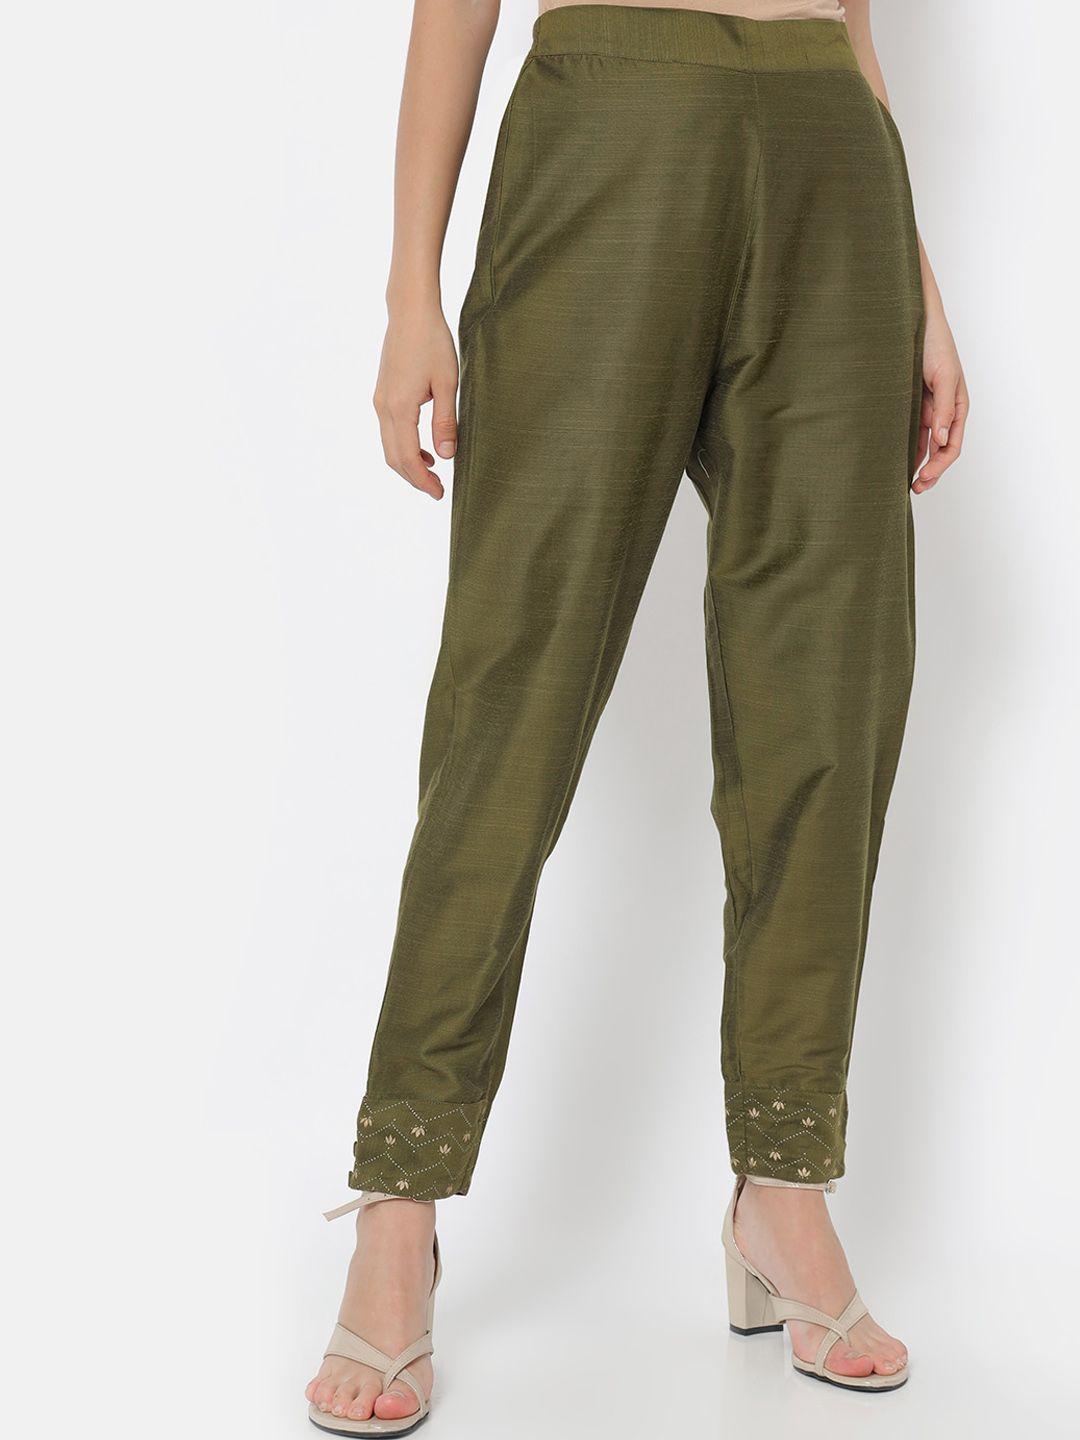 saaki women olive green solid trousers